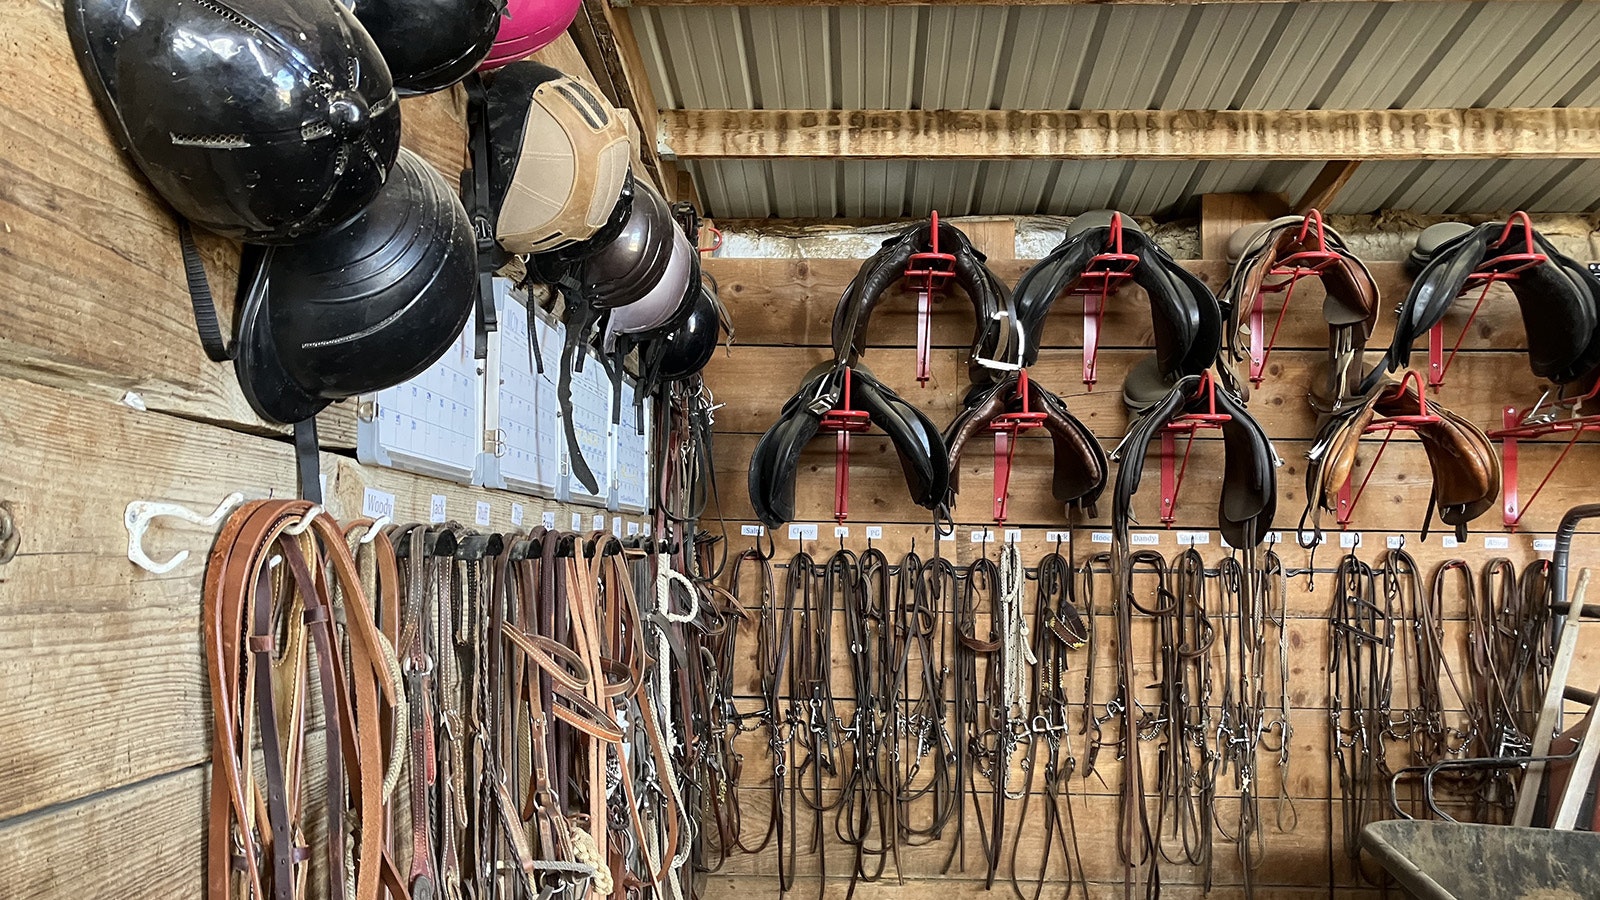 Rows of tack in the horse barn are labeled for all the horses who are part of the riding operation.